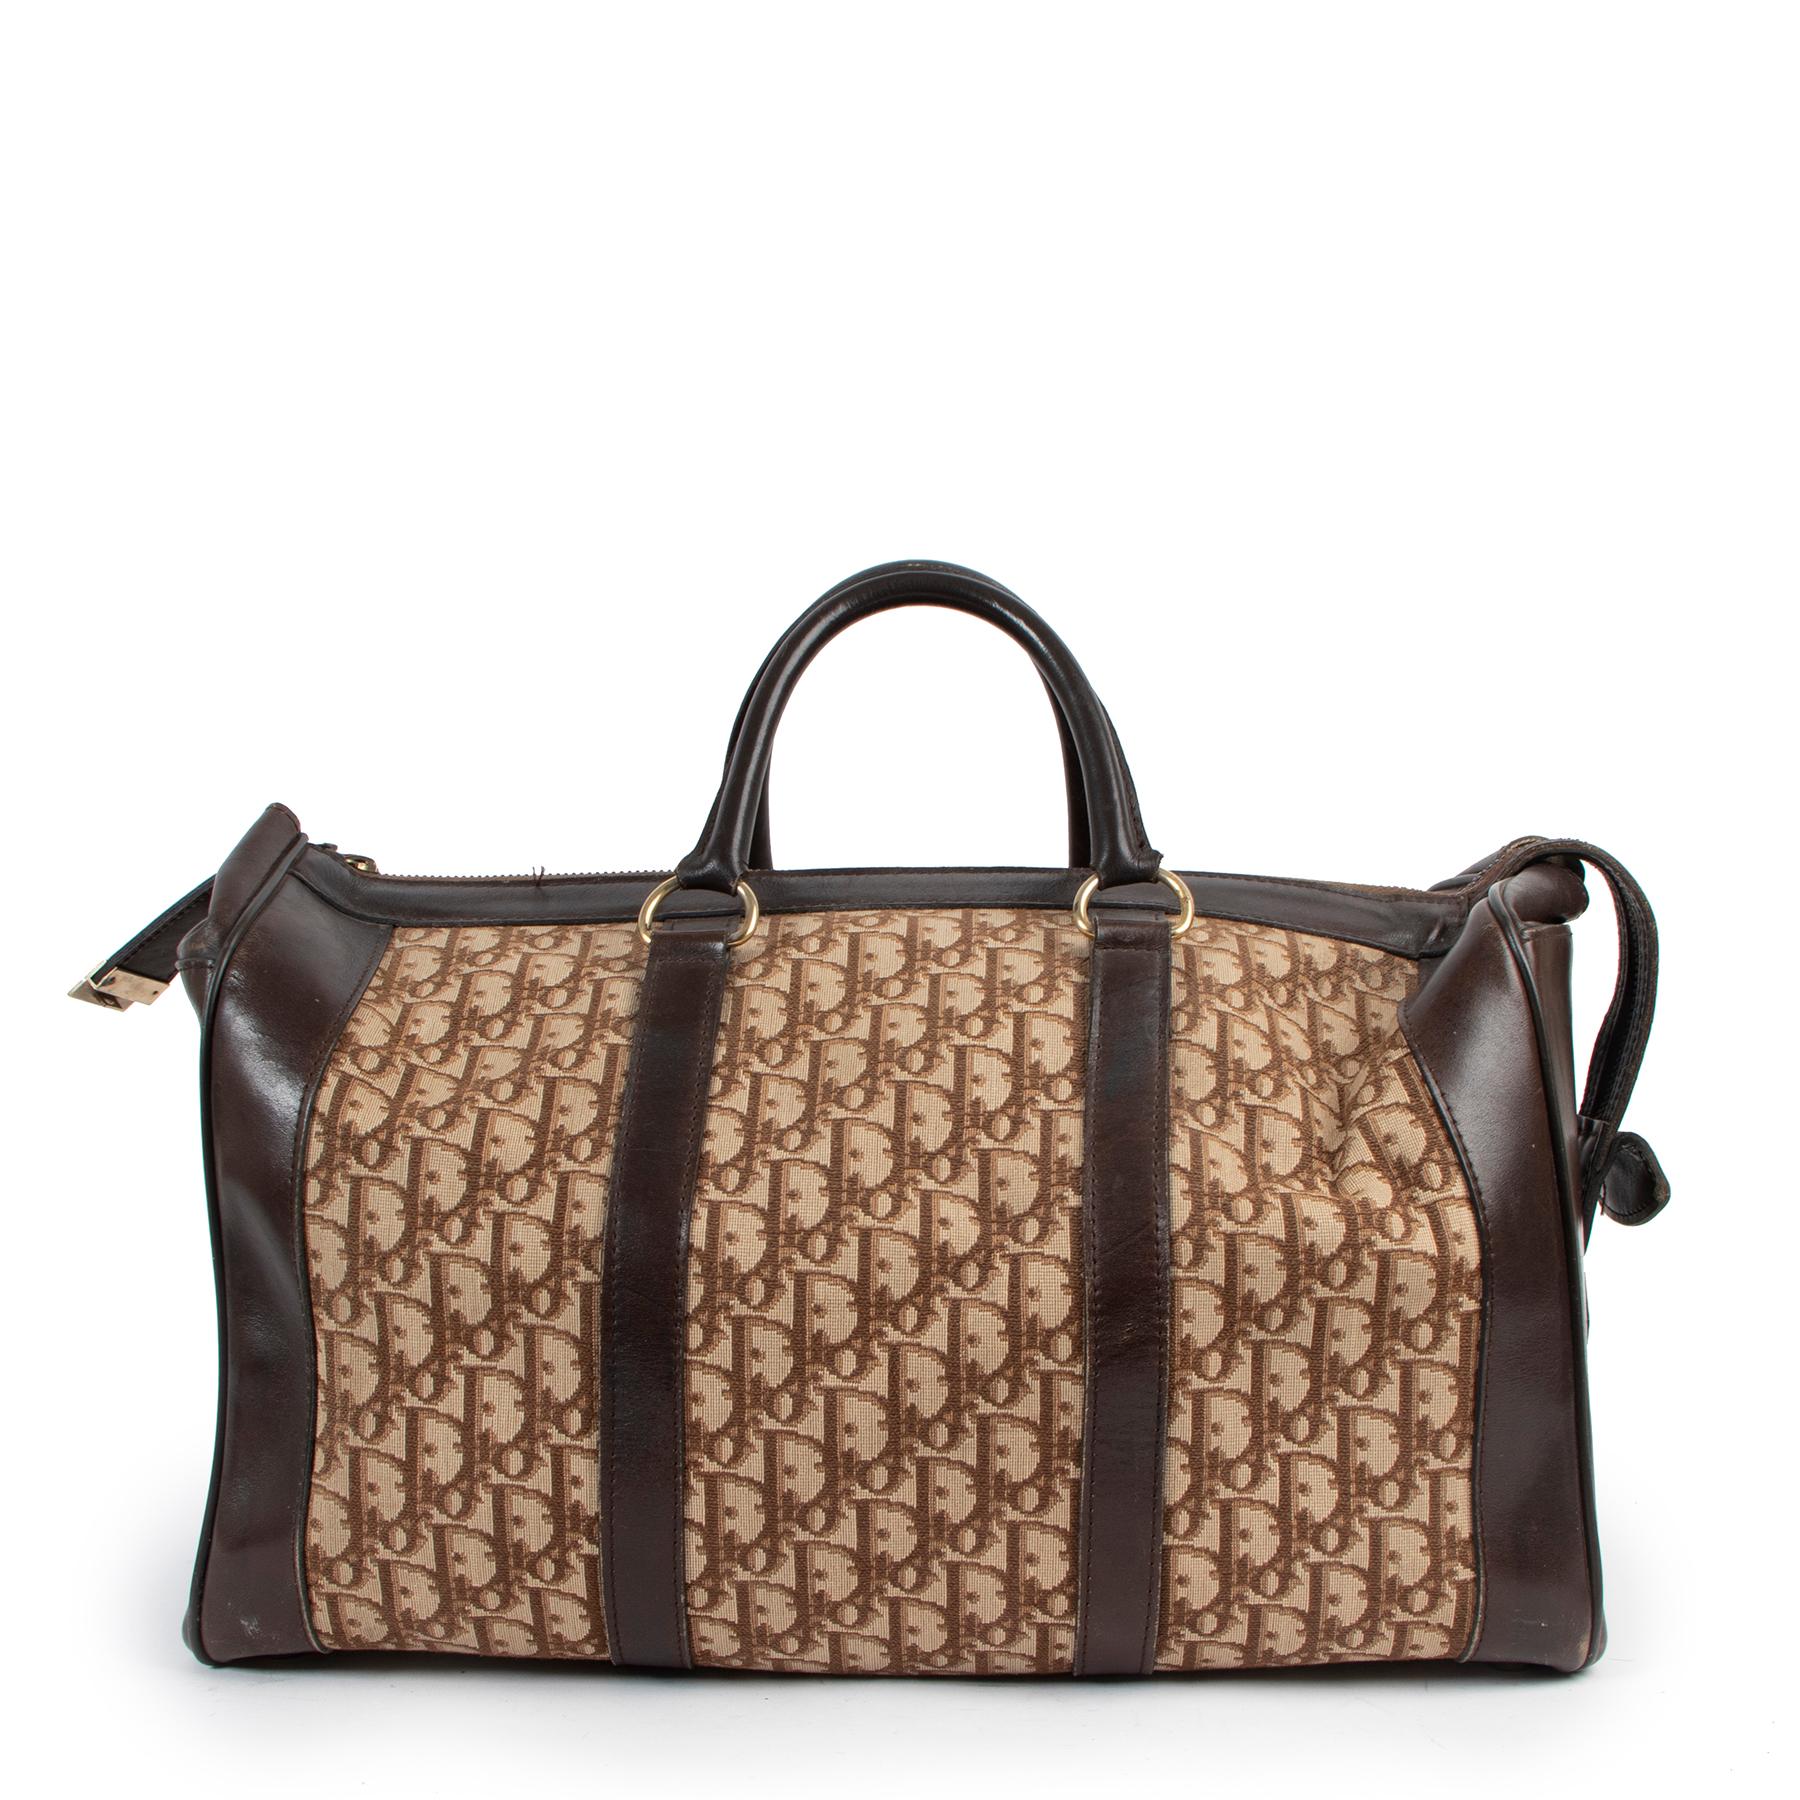 Christian Dior Brown Oblique Monogram Vintage Travel Bag

This Dior duffle travel bag is distinguished by a functional and elegant design. The beige and brown Dior Oblique jacquard canvas is enhanced by details in brown smooth calfskin and the CD